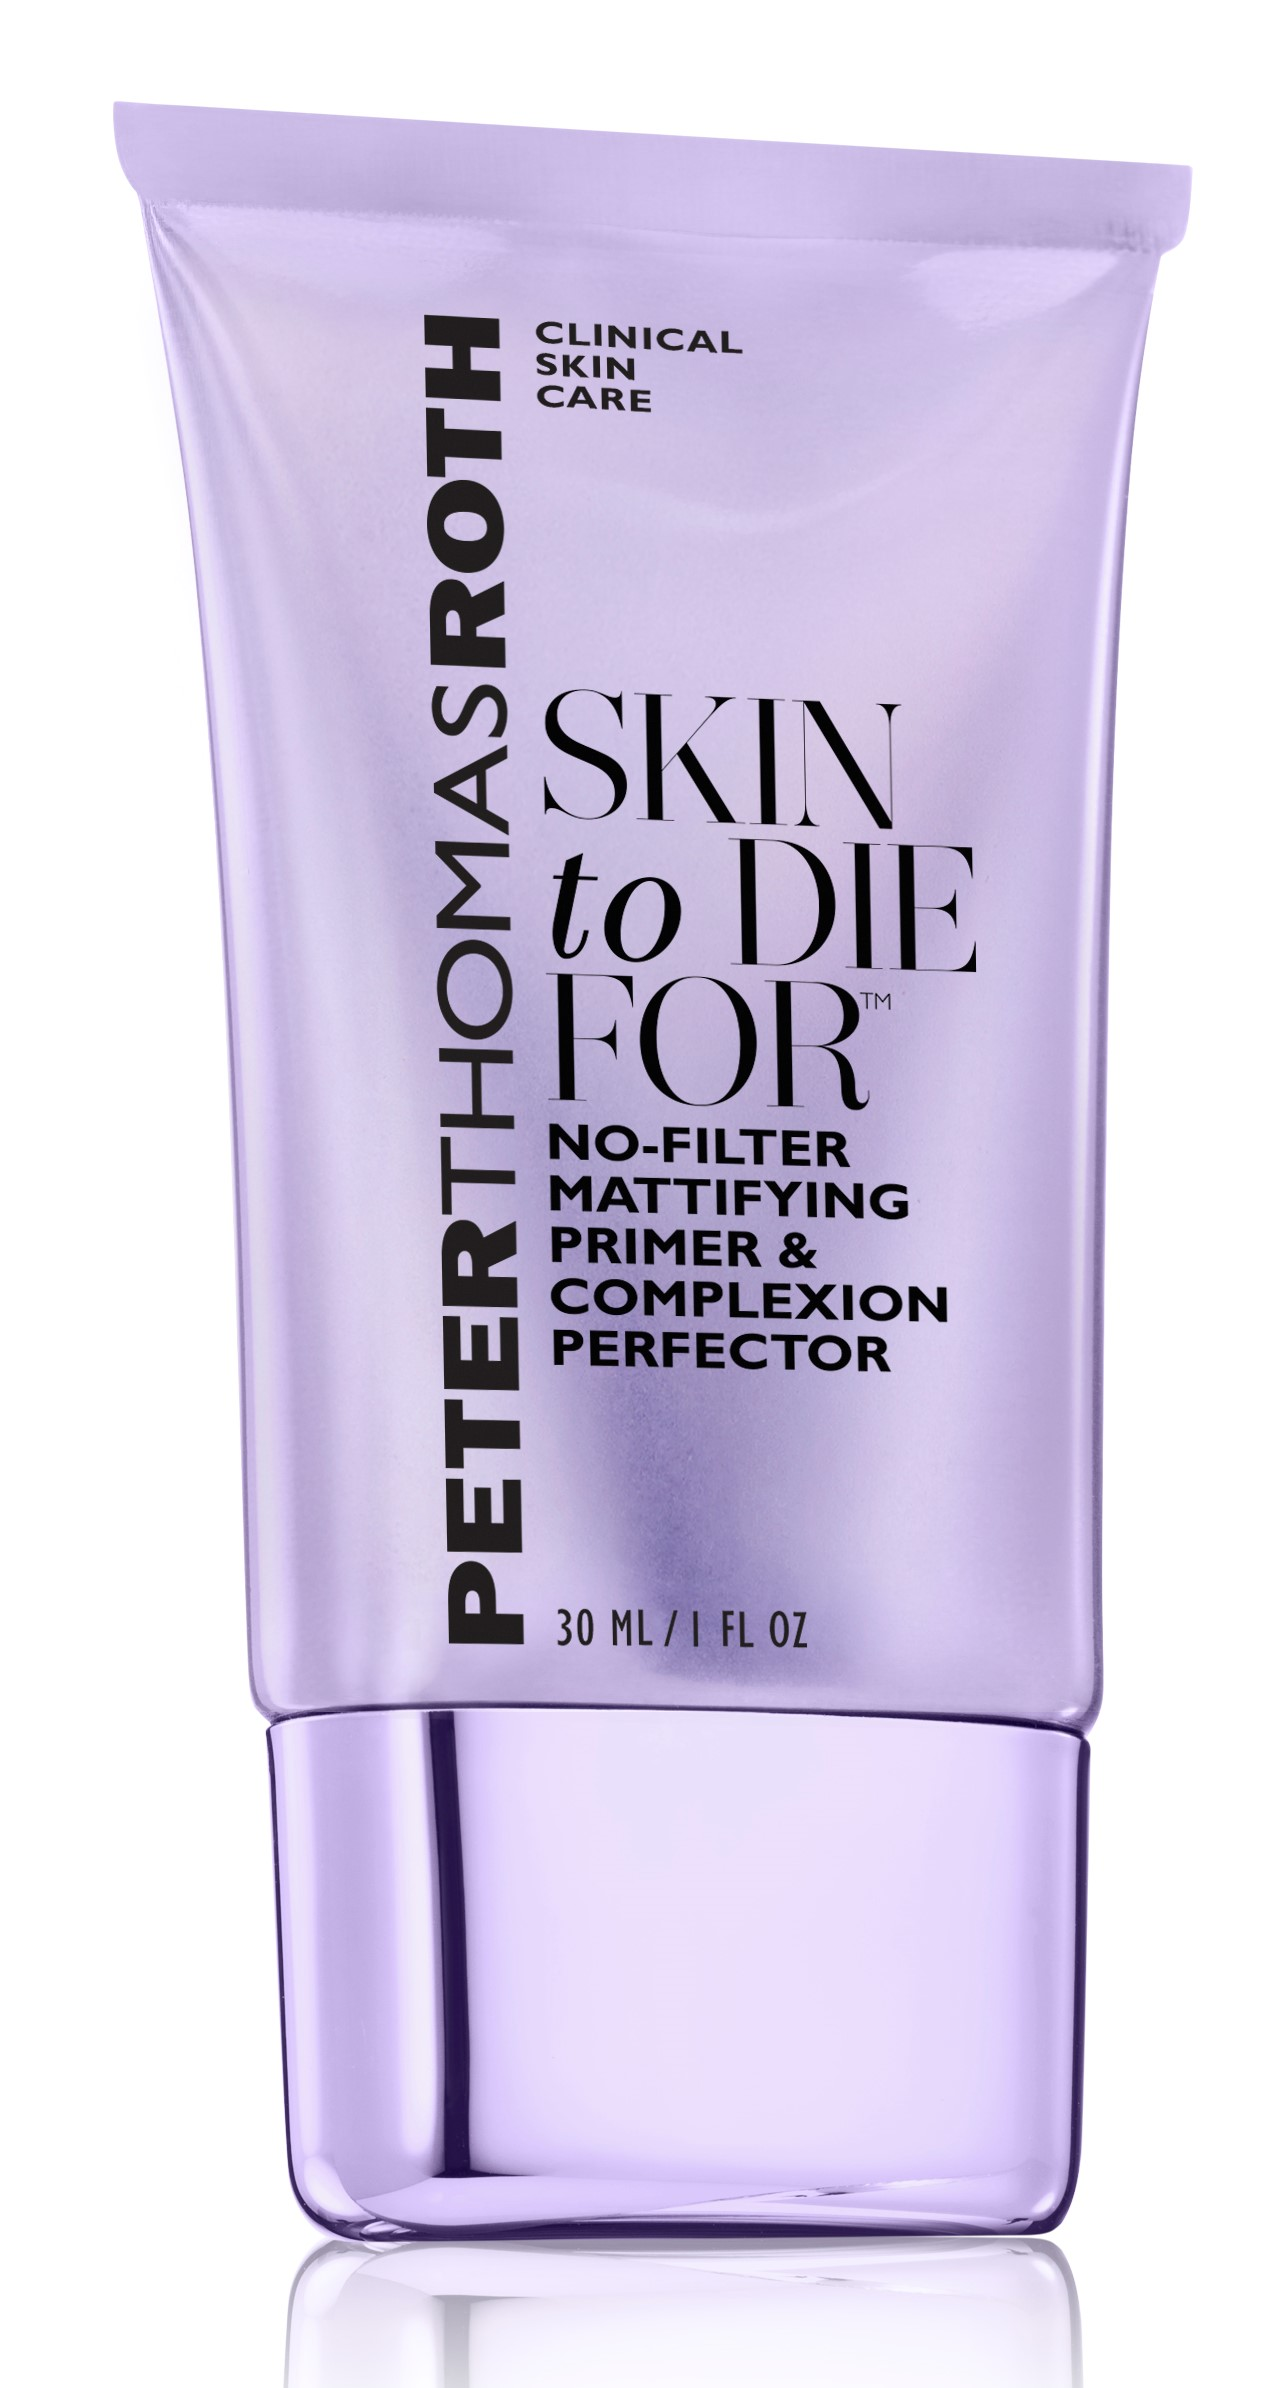 Billede af Peter Thomas Roth Skin To Die For Mattifying Primer & Complexion Perfector 30 ml. hos Well.dk